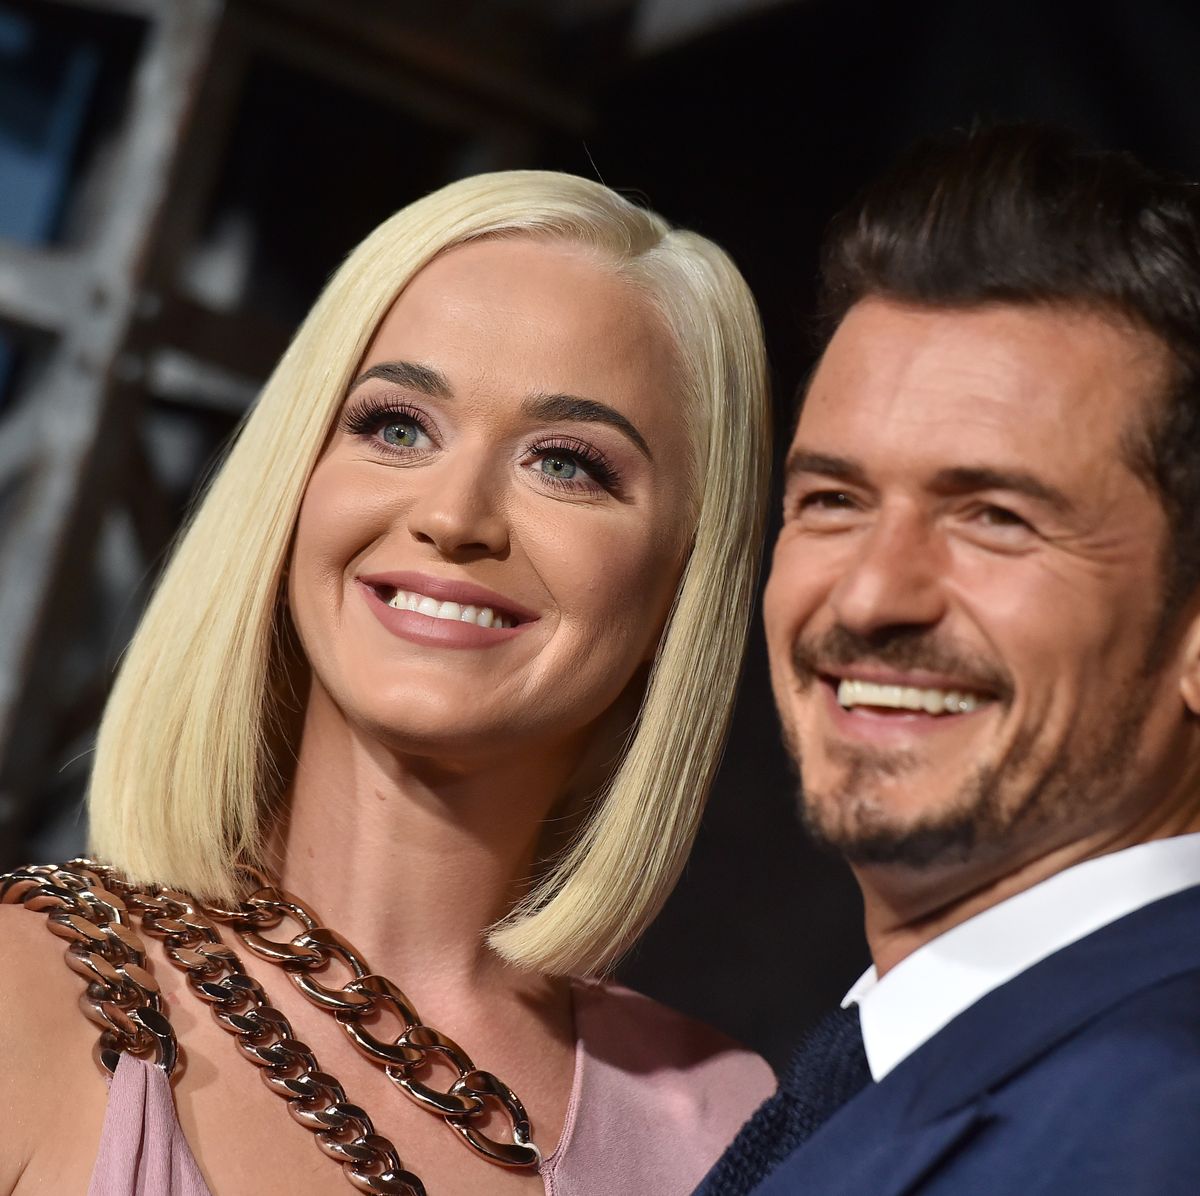 https://hips.hearstapps.com/hmg-prod/images/katy-perry-and-orlando-bloom-attend-the-la-premiere-of-news-photo-1699546617.jpg?crop=0.668xw:1.00xh;0.236xw,0&resize=1200:*